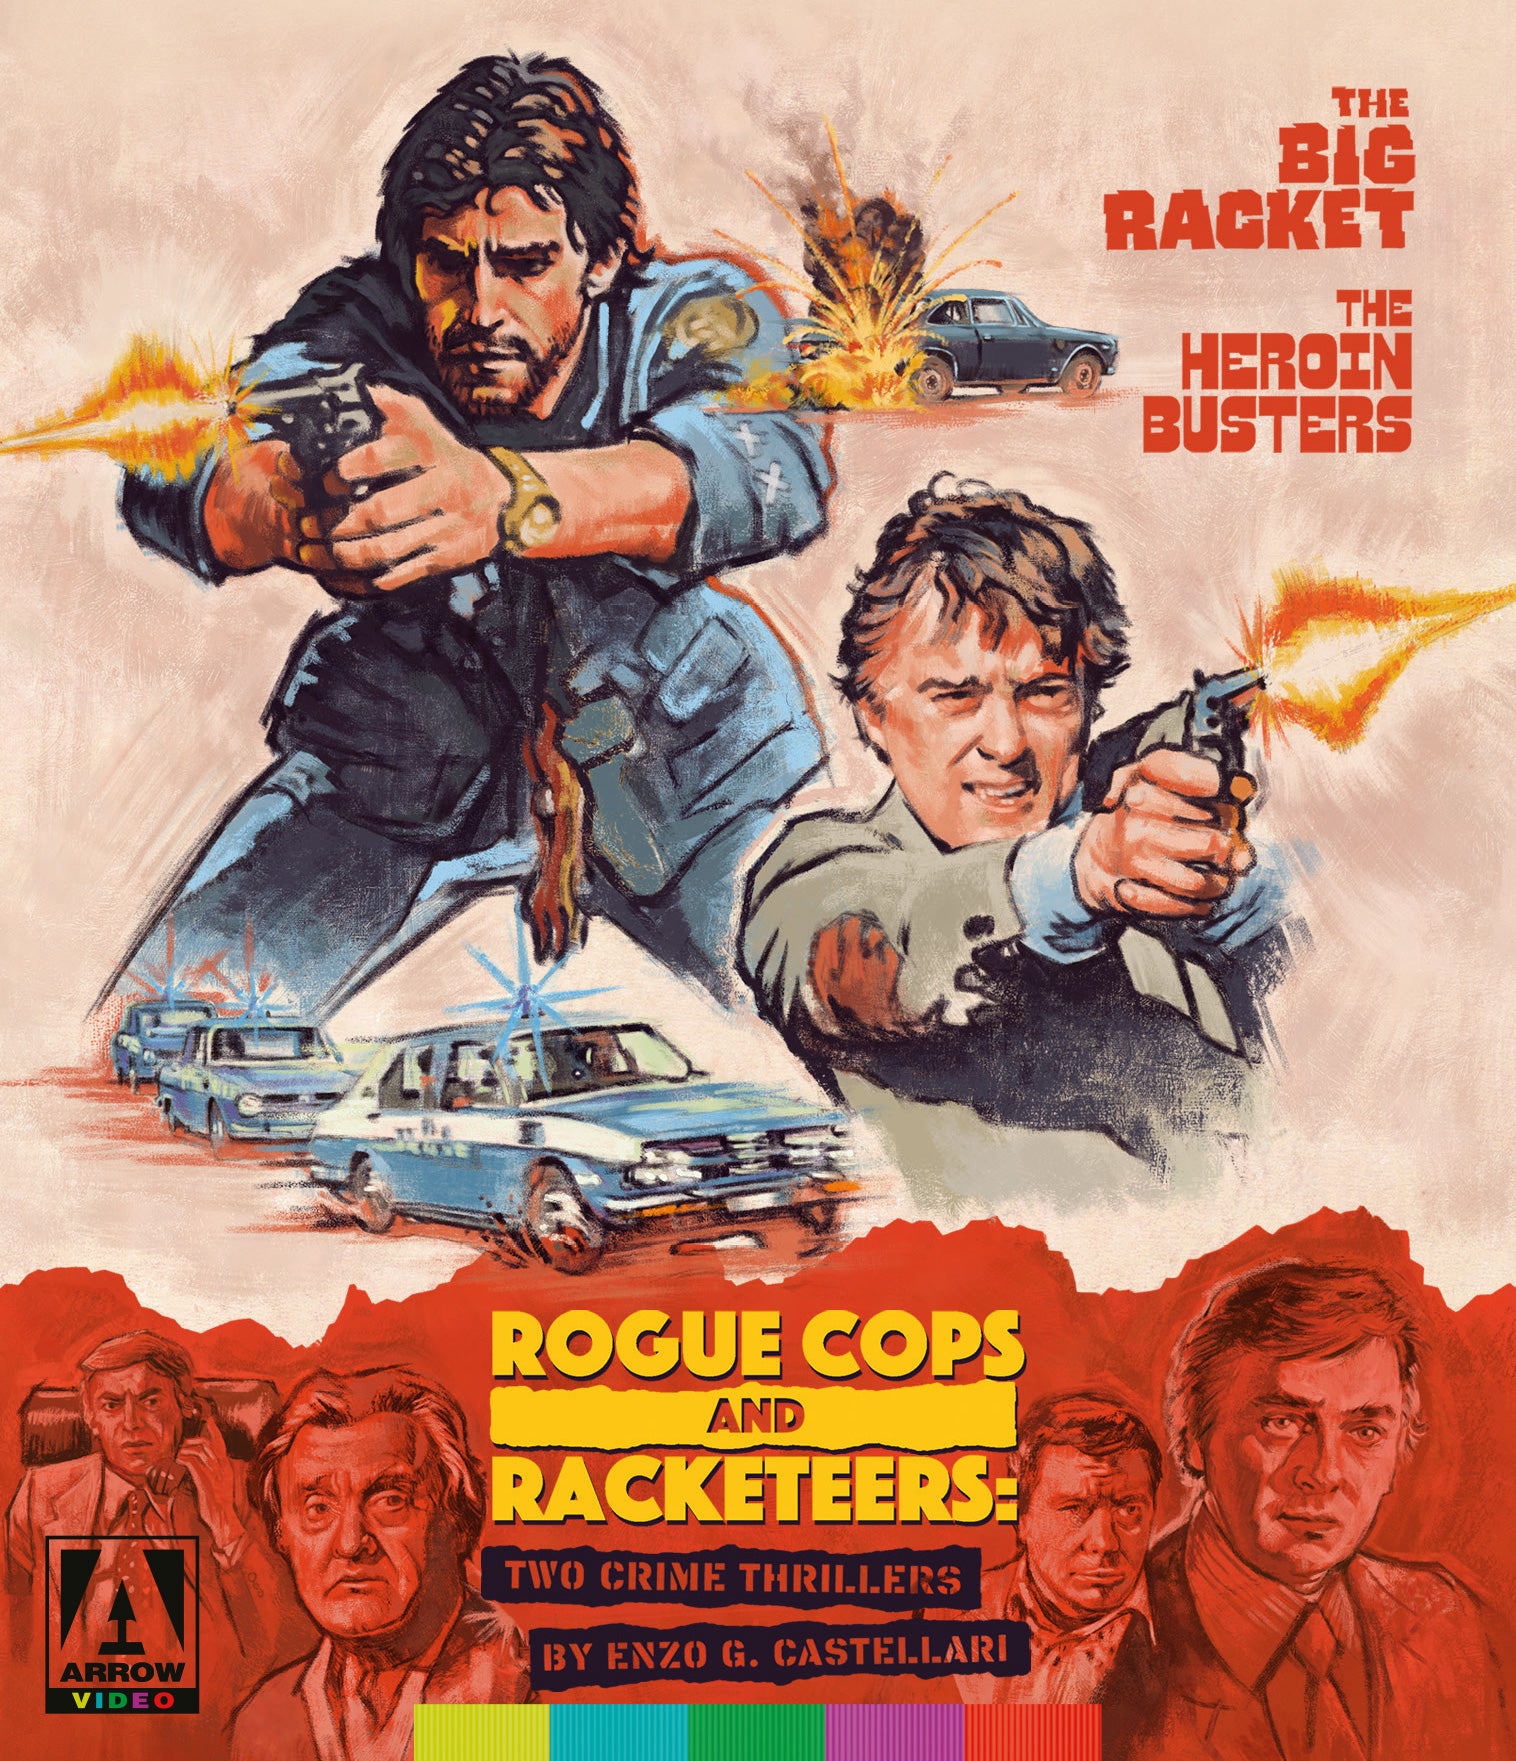 ROGUE COPS AND RACKETEERS: TWO CRIME THRILLERS BY ENZO G CASTELLARI BLU-RAY